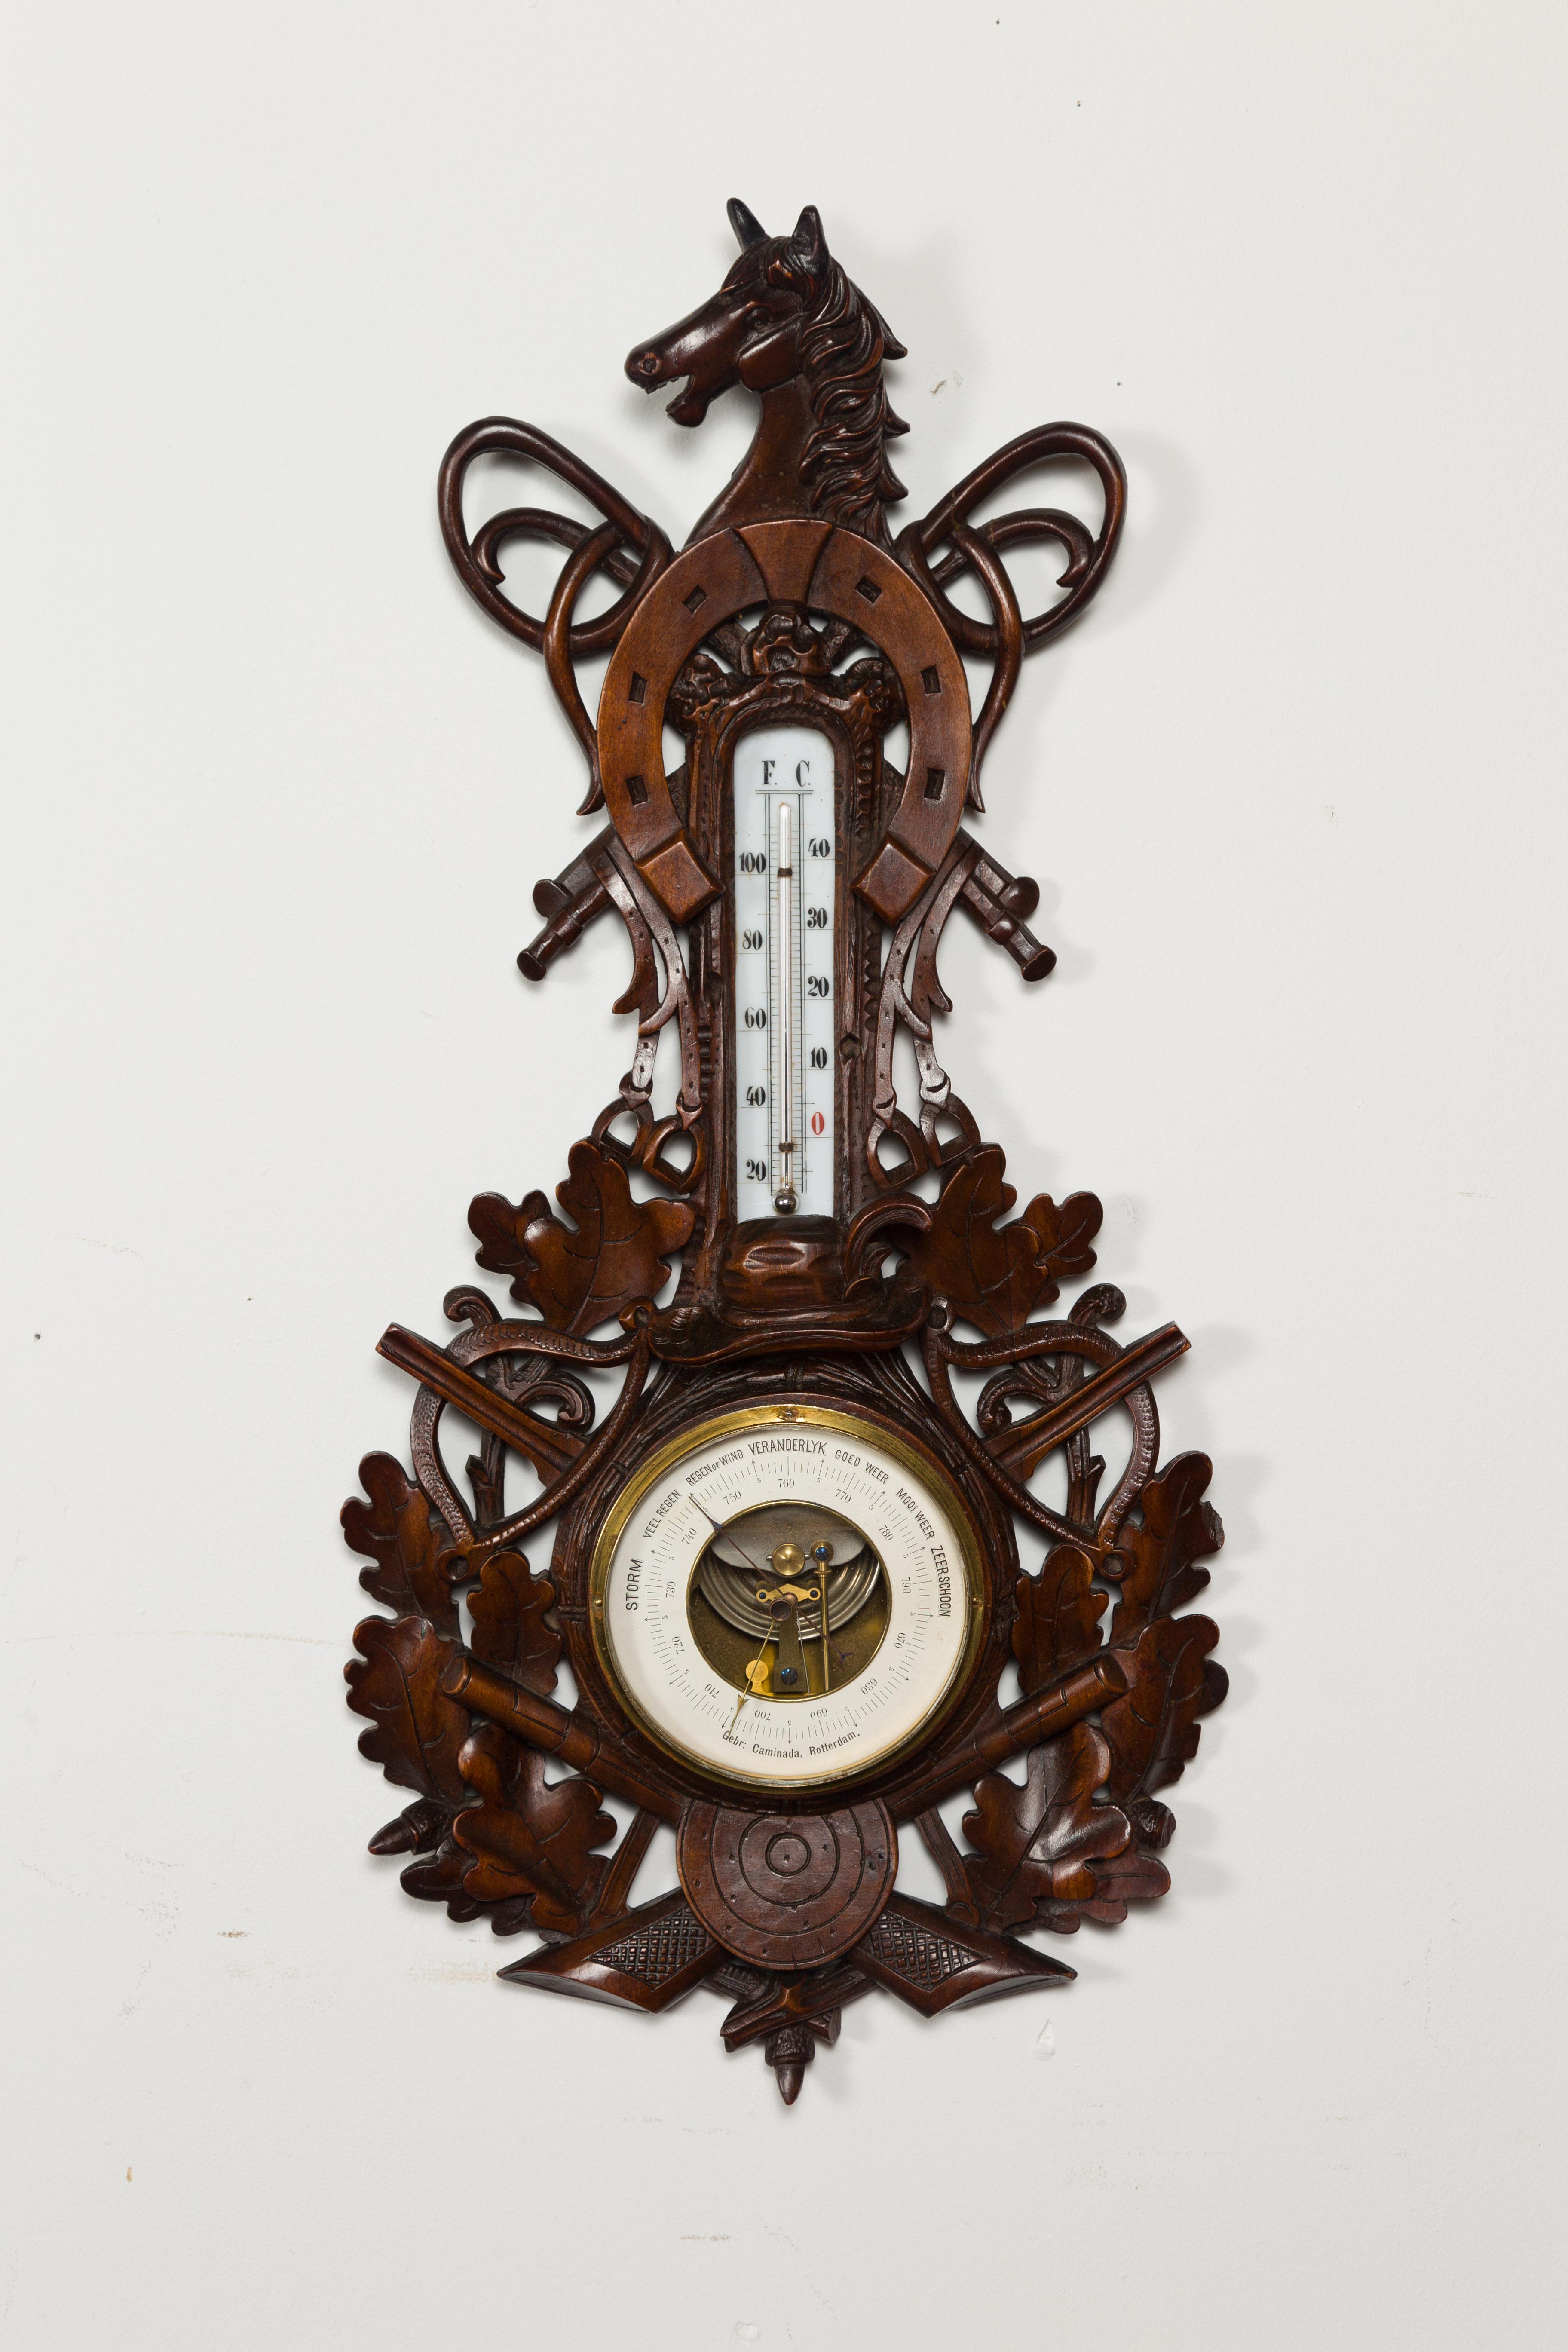 A Dutch carved wooden barometer from the late 19th century, with horse motif, signed by Gebroeders Caminada, Rotterdam. Hand carved in the Netherlands by the Gebroeders Caminada Company established in Rotterdam in 1856, this wooden barometer